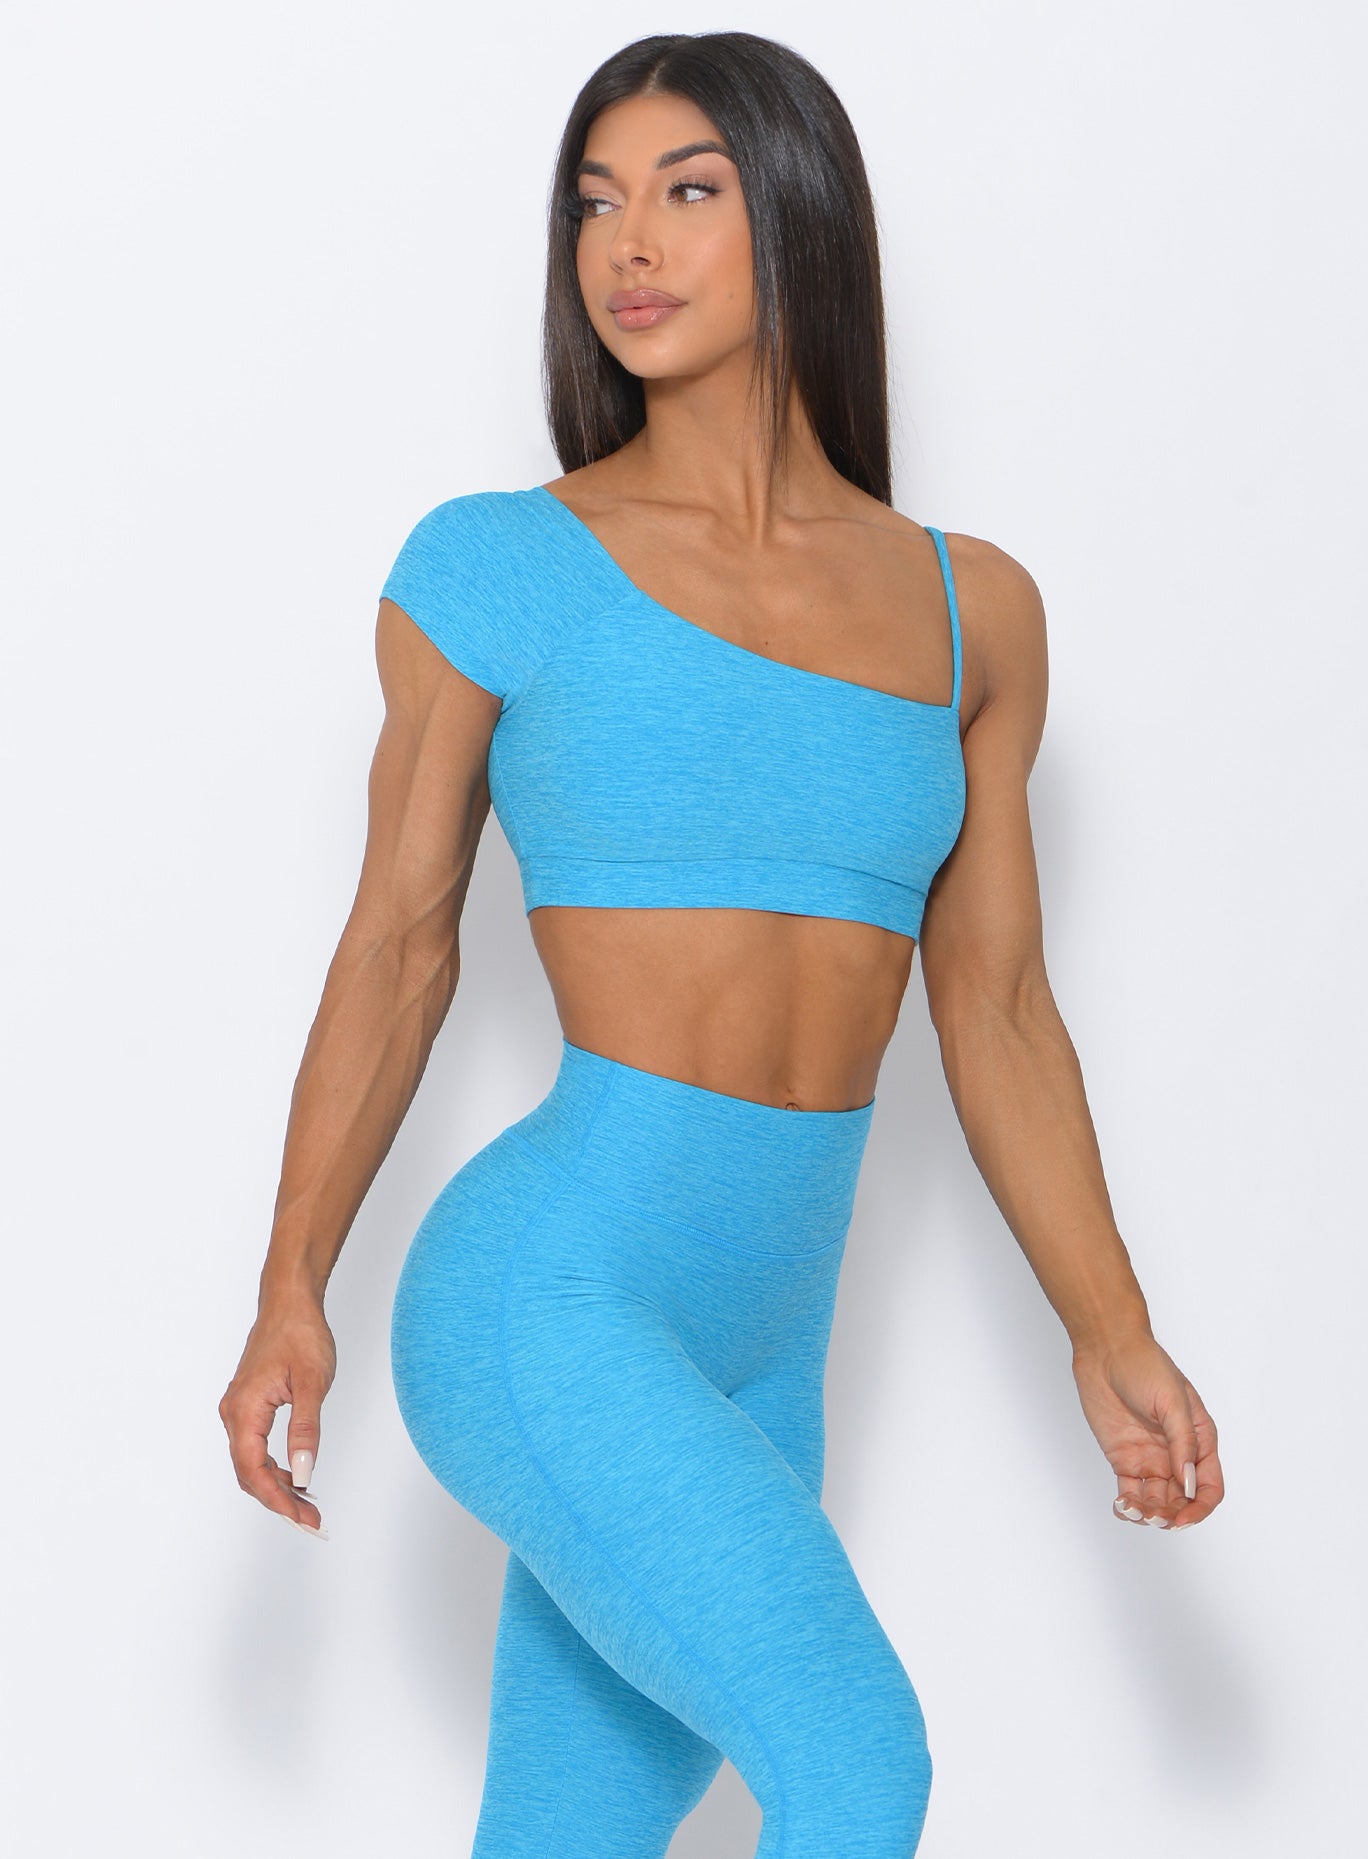 Front view of the model wearing our Adore Sports Bra  in icy blue and a matching leggings 